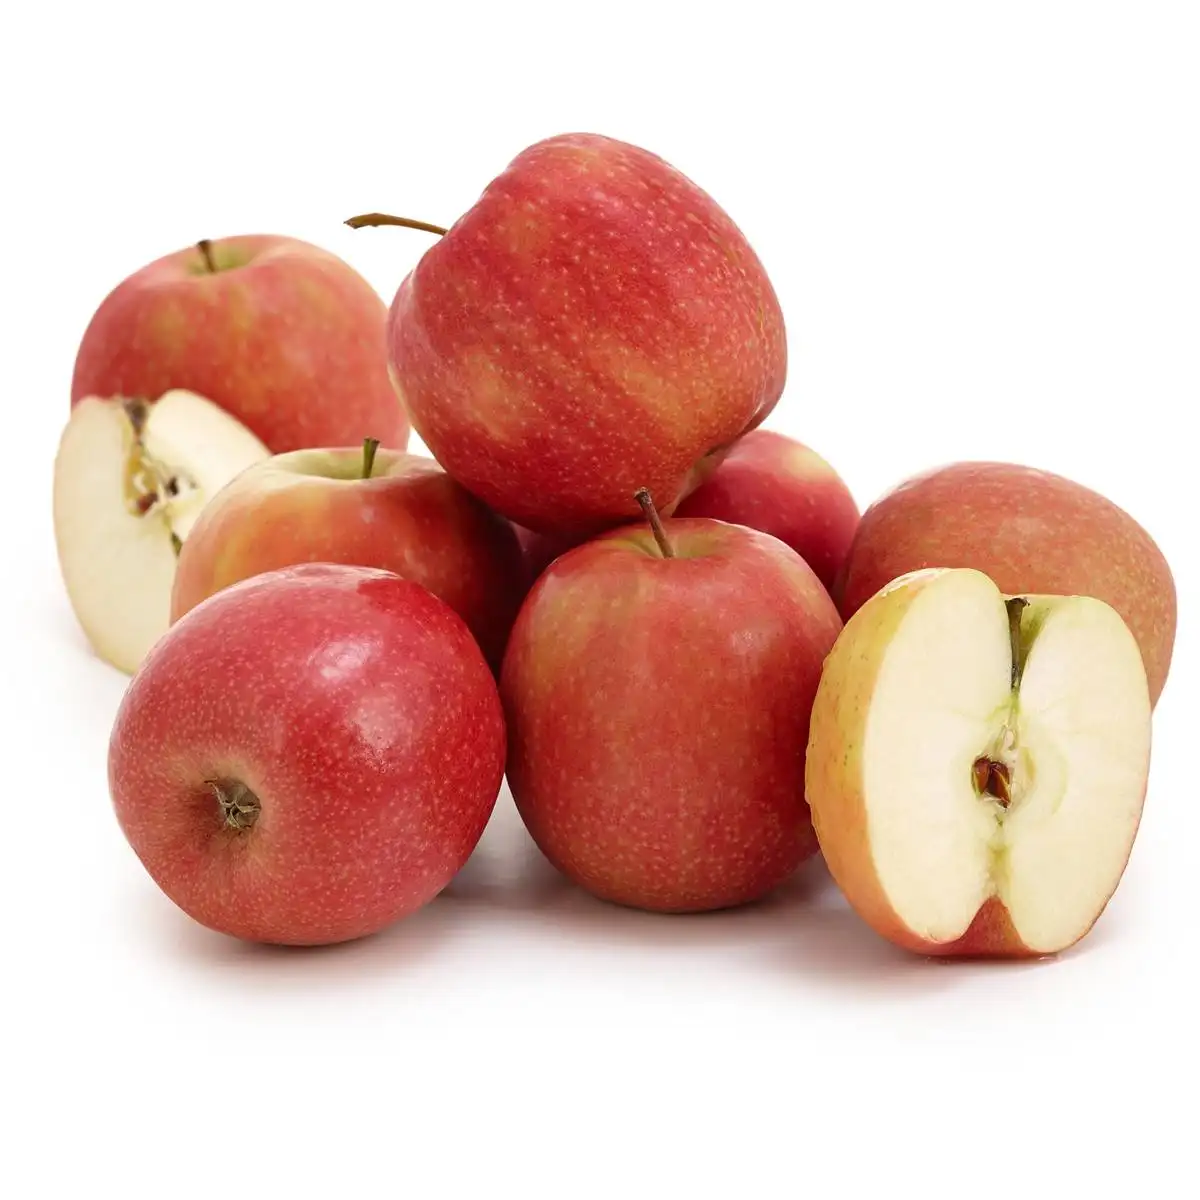 Fresh Green Granny Smith Apples /Fresh Red Fuji Apples /Royal Gala/Red Delicious for sale